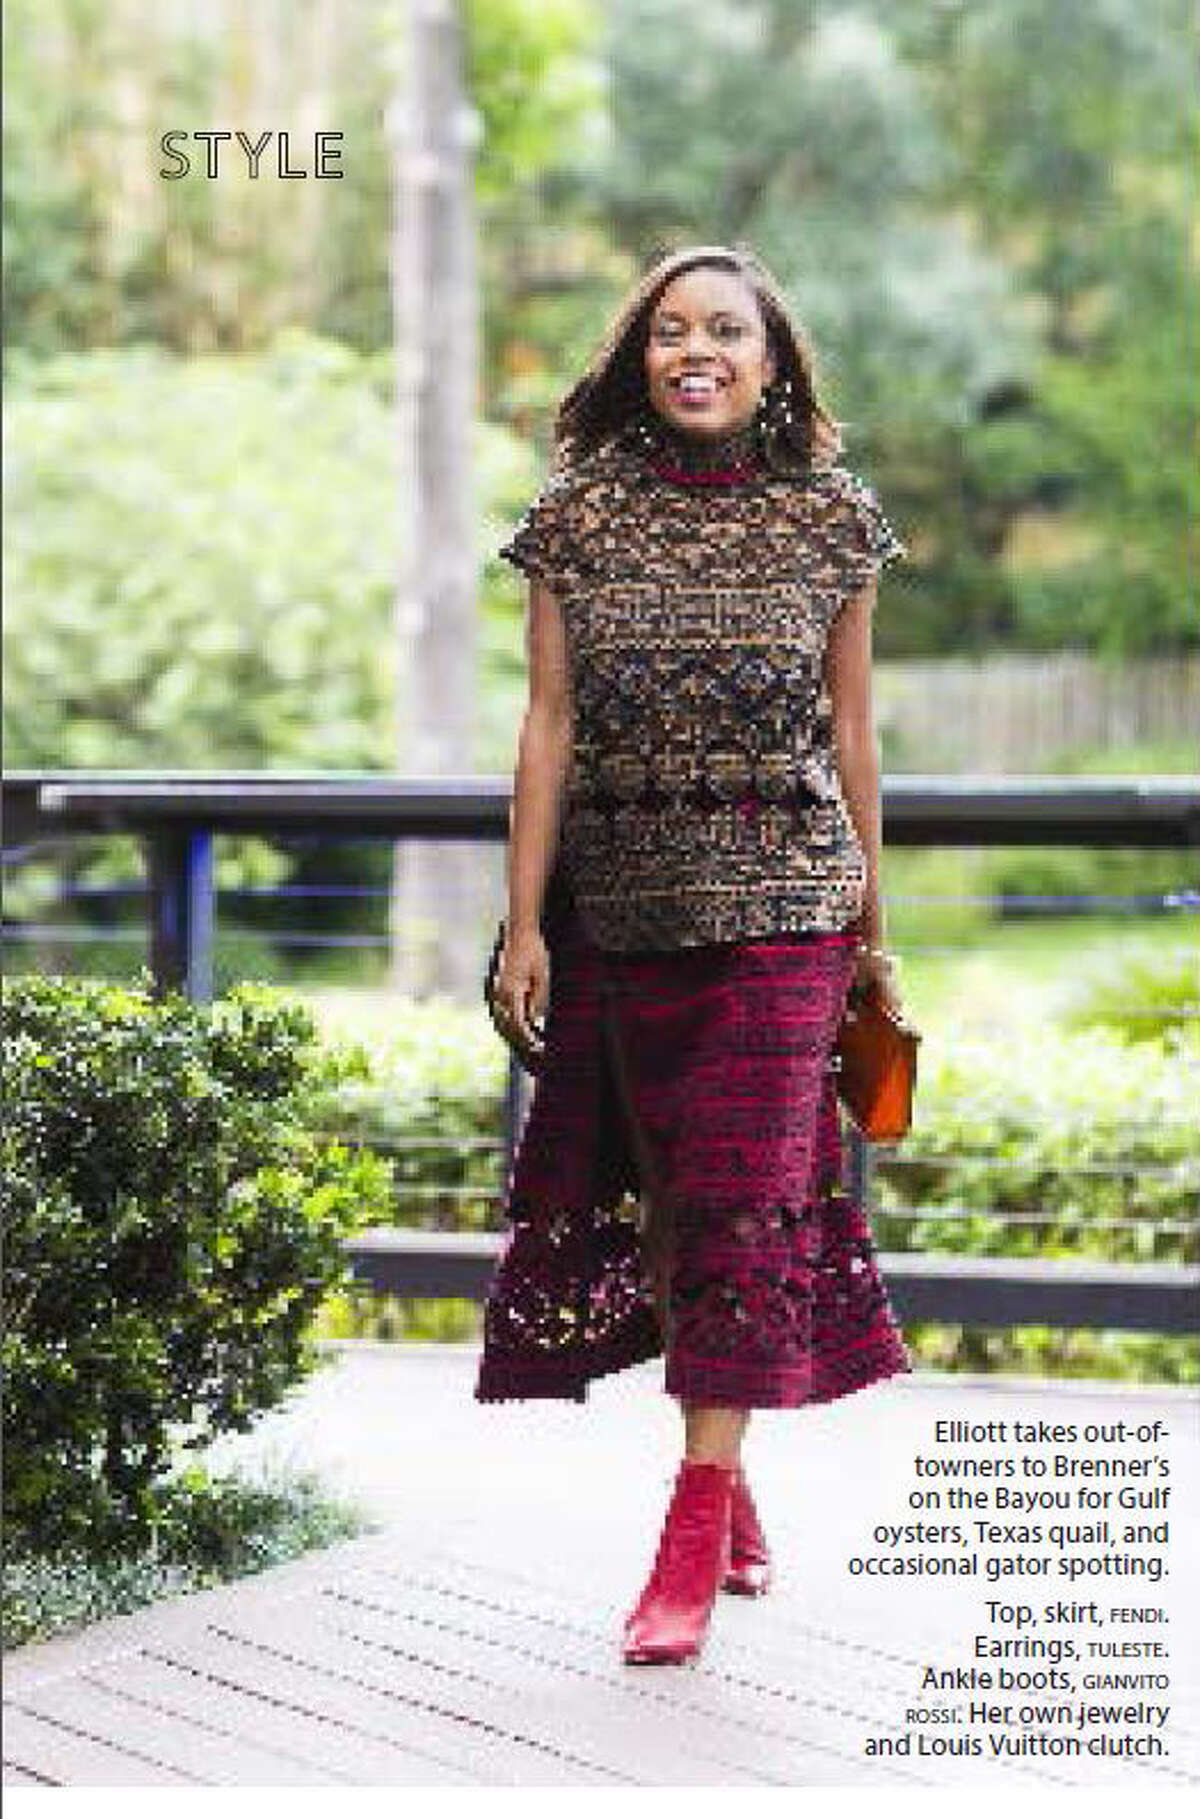 Amber Elliott wears a Fendi skirt and carries a Louis Vuitton clutch in this photo in Elle magazine.